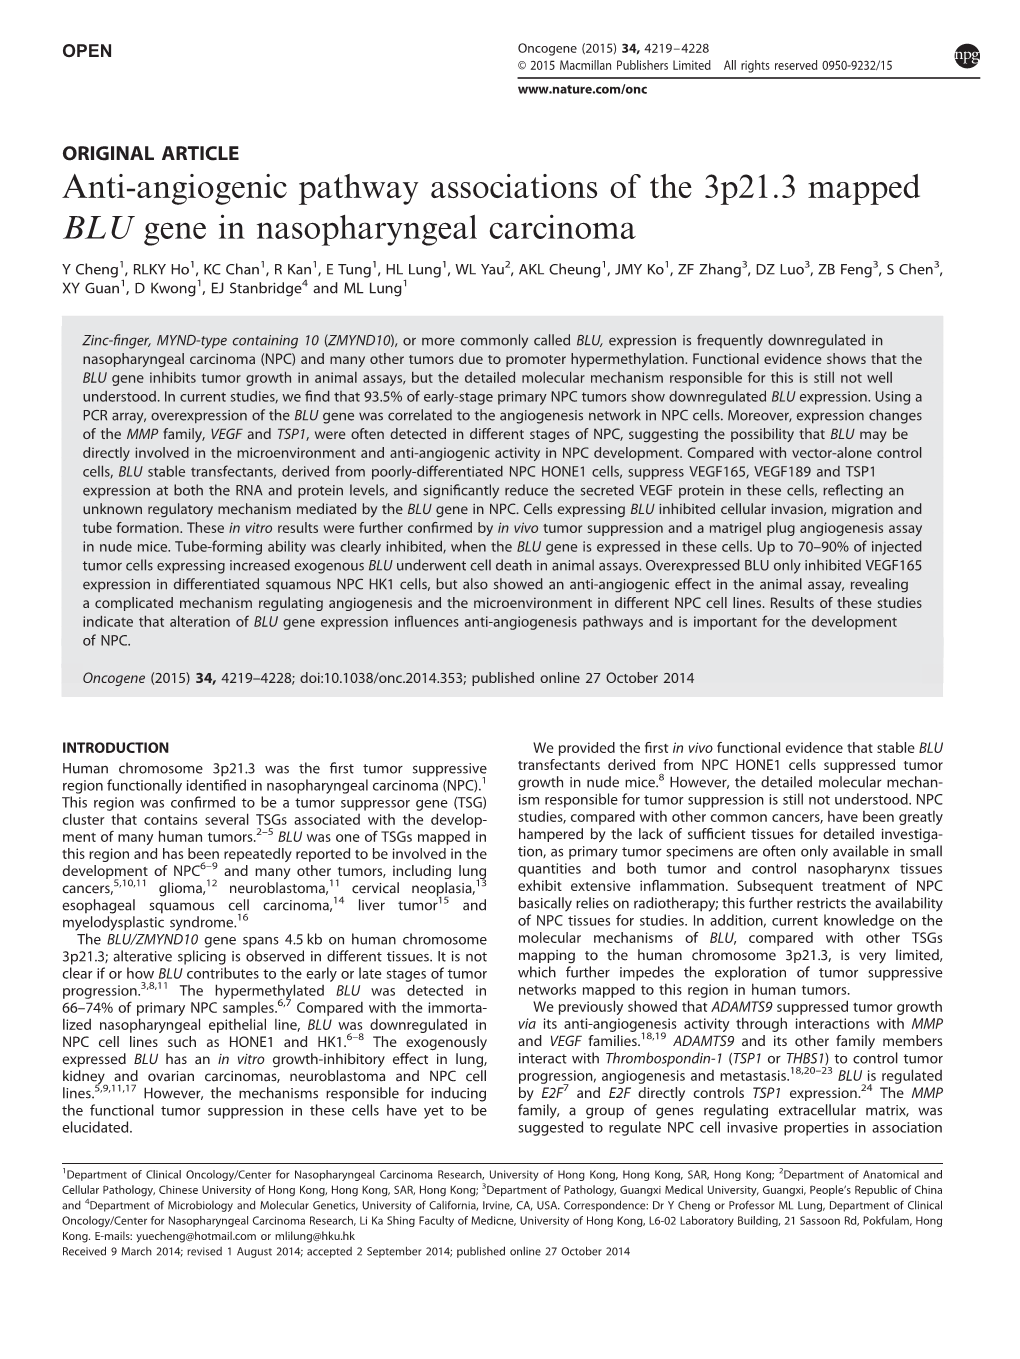 Anti-Angiogenic Pathway Associations of the 3P21.3 Mapped BLU Gene in Nasopharyngeal Carcinoma